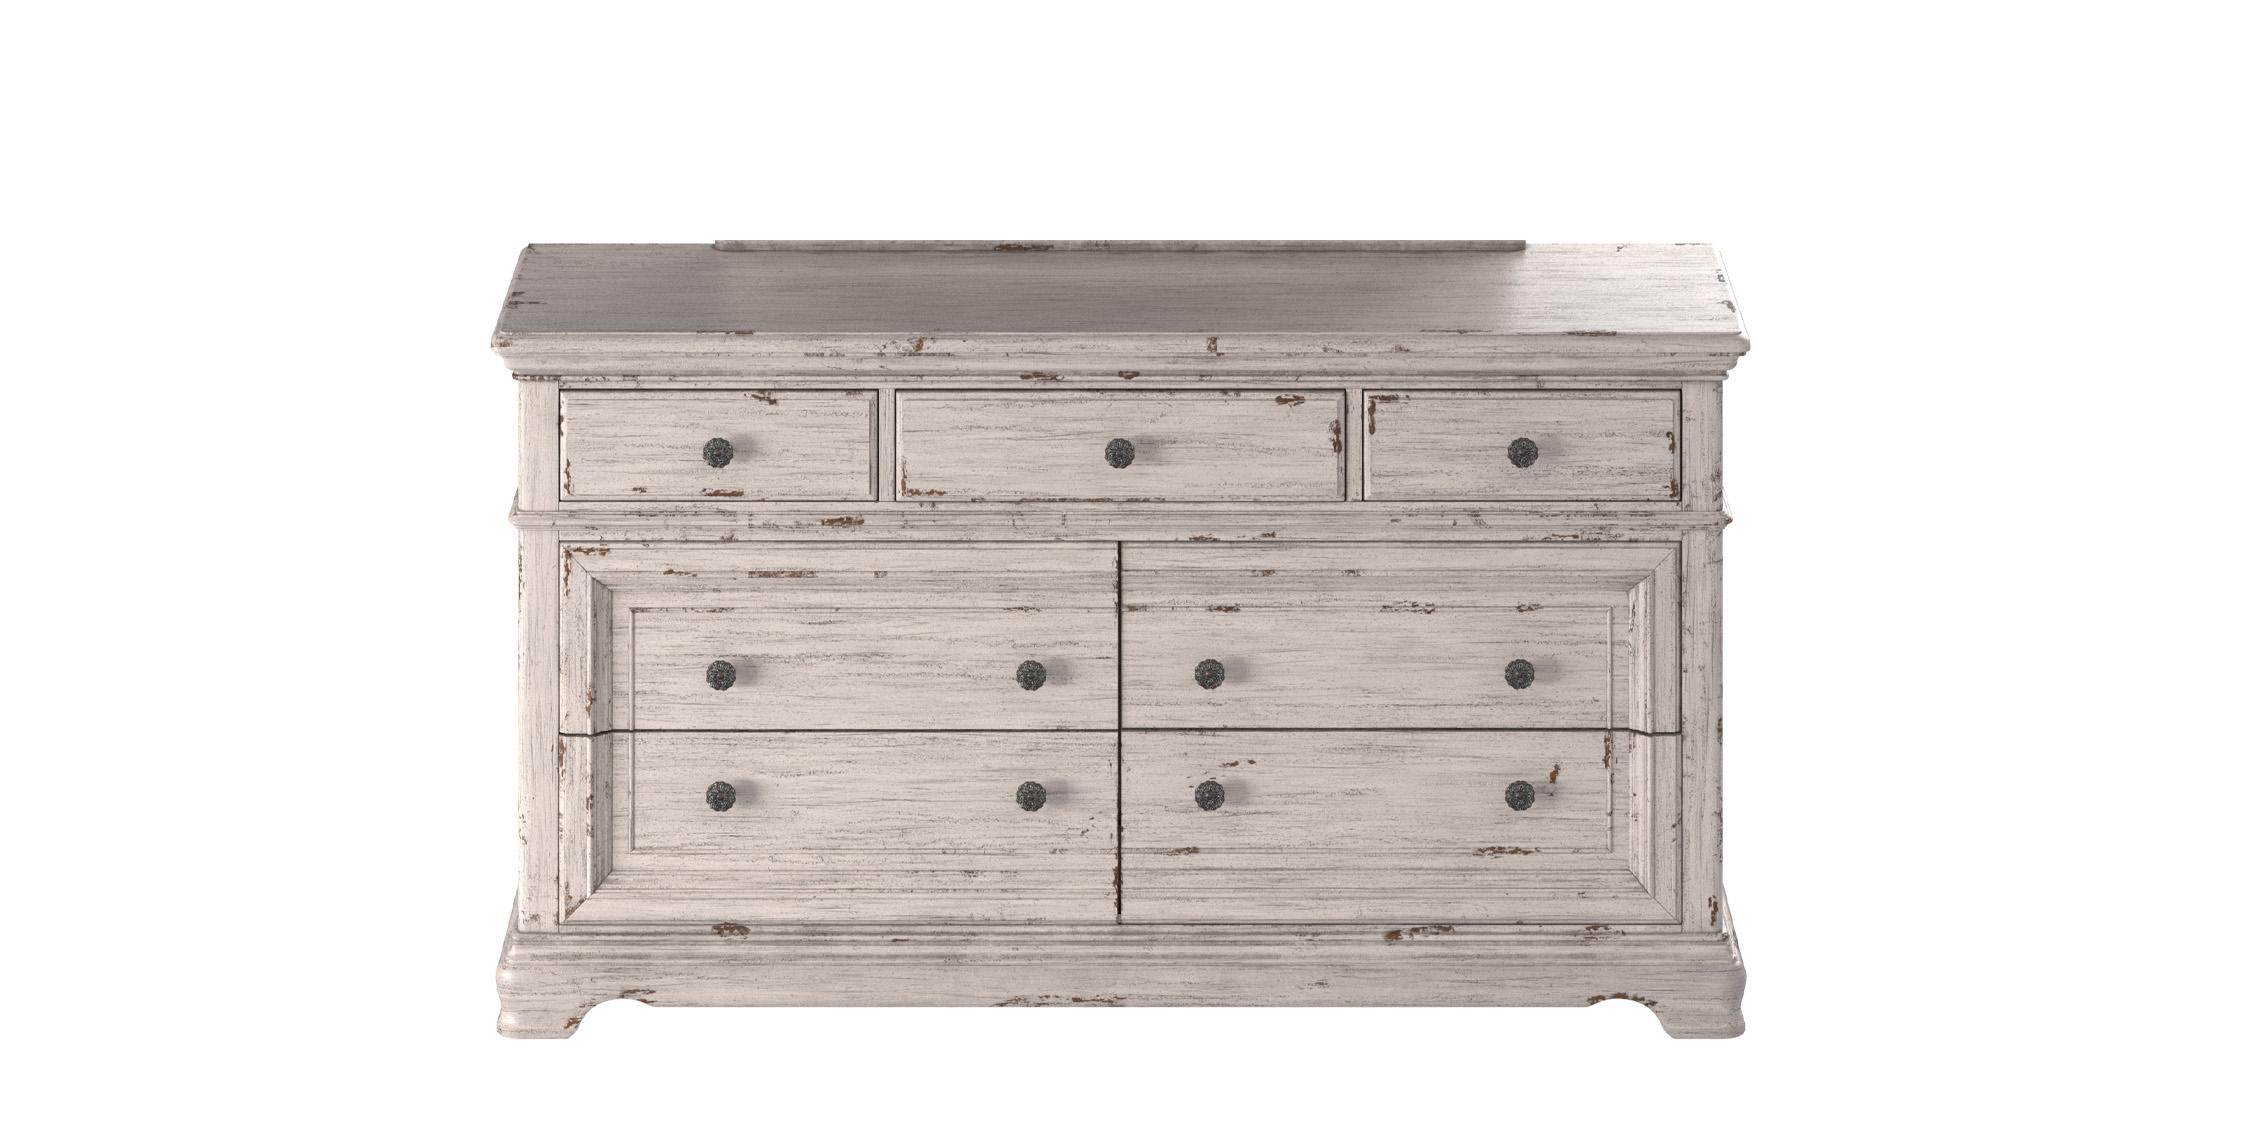 American Woodcrafters PROVIDENCE 1910-270 Dresser